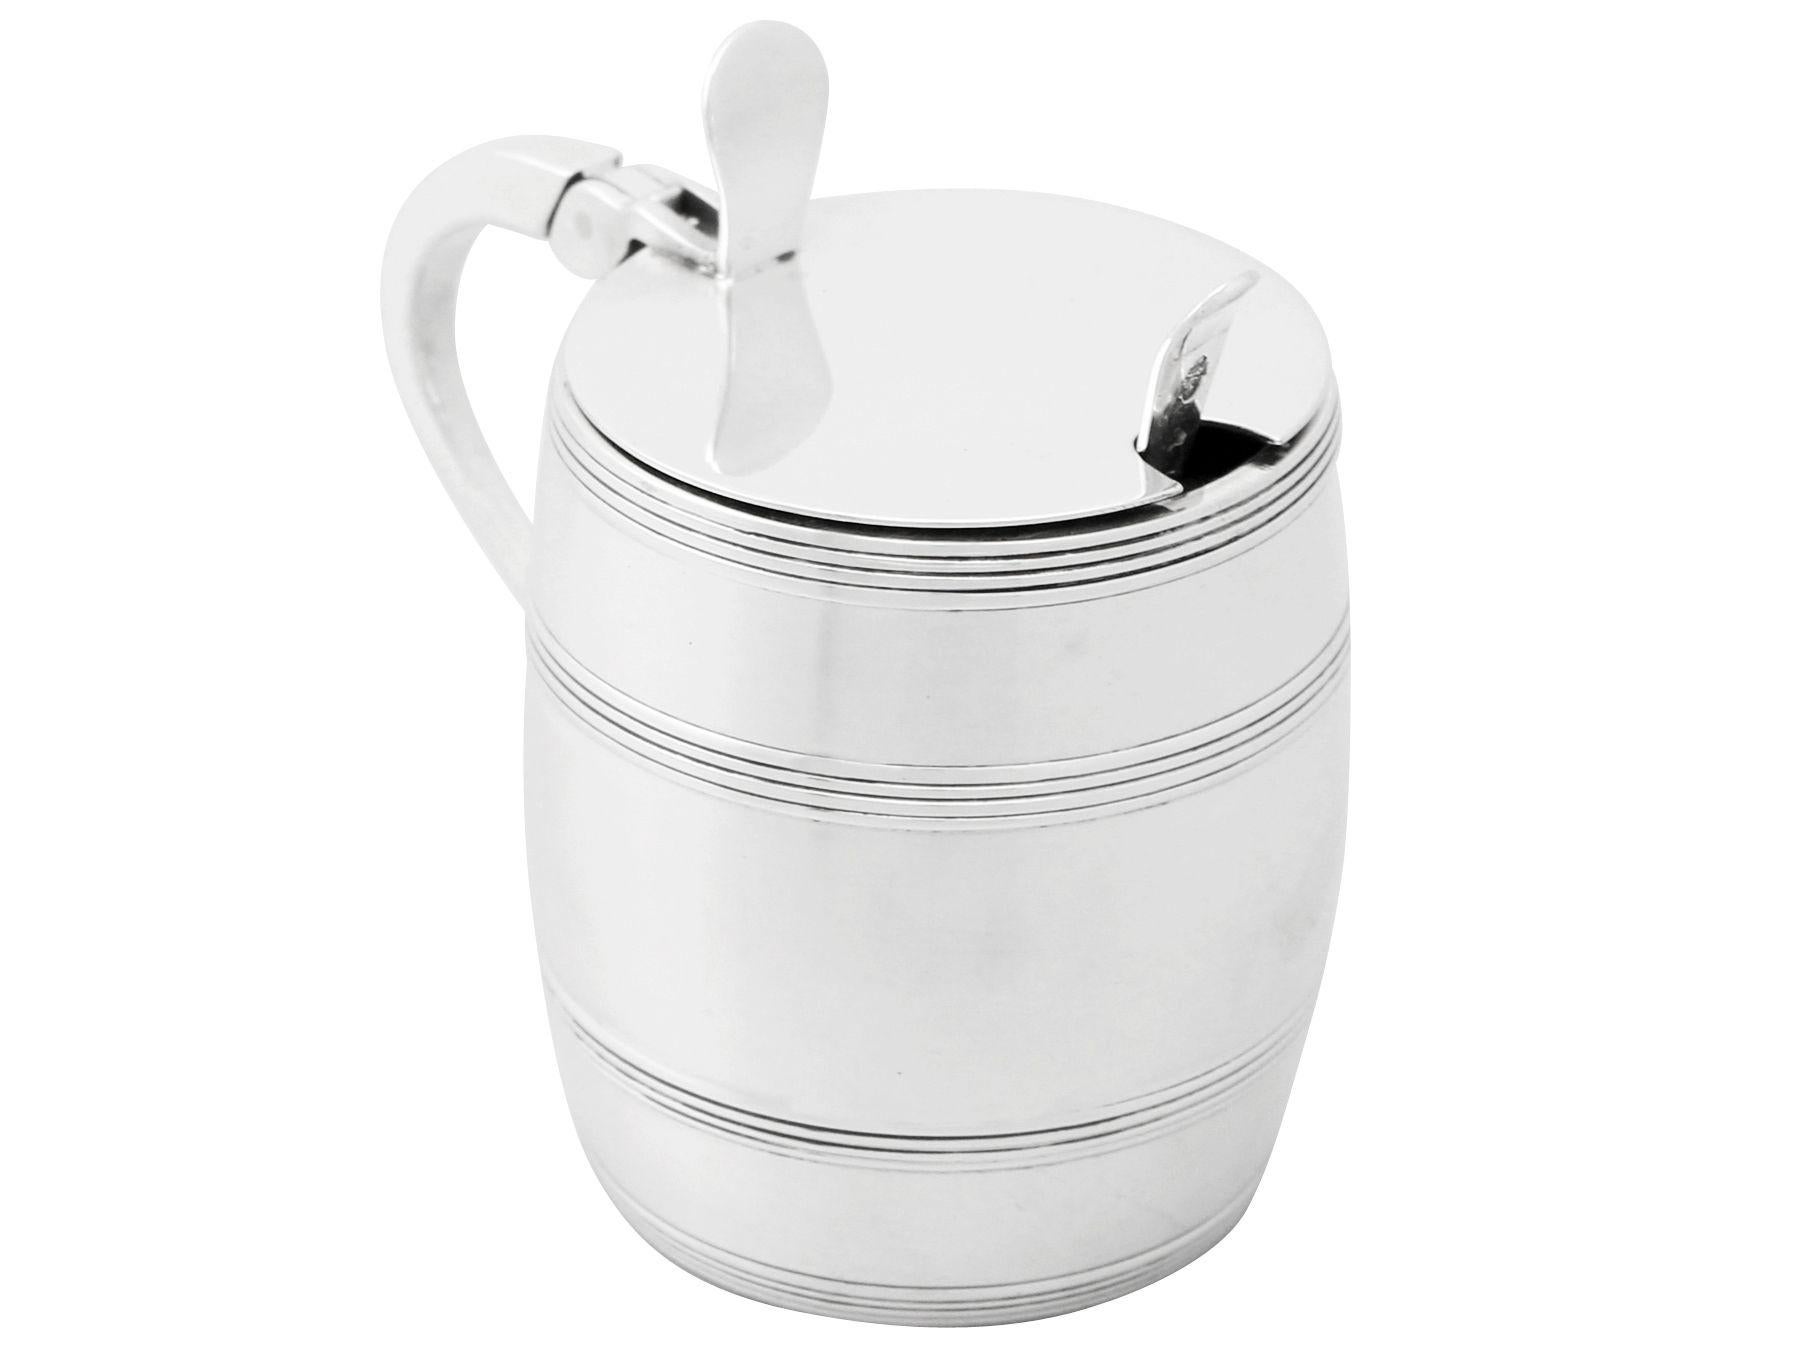 An exceptional, fine and impressive vintage Elizabeth II English sterling silver mustard pot in the form of a barrel; an addition to our silver condiments collection.

This exceptional vintage Elizabeth II sterling silver mustard pot has been